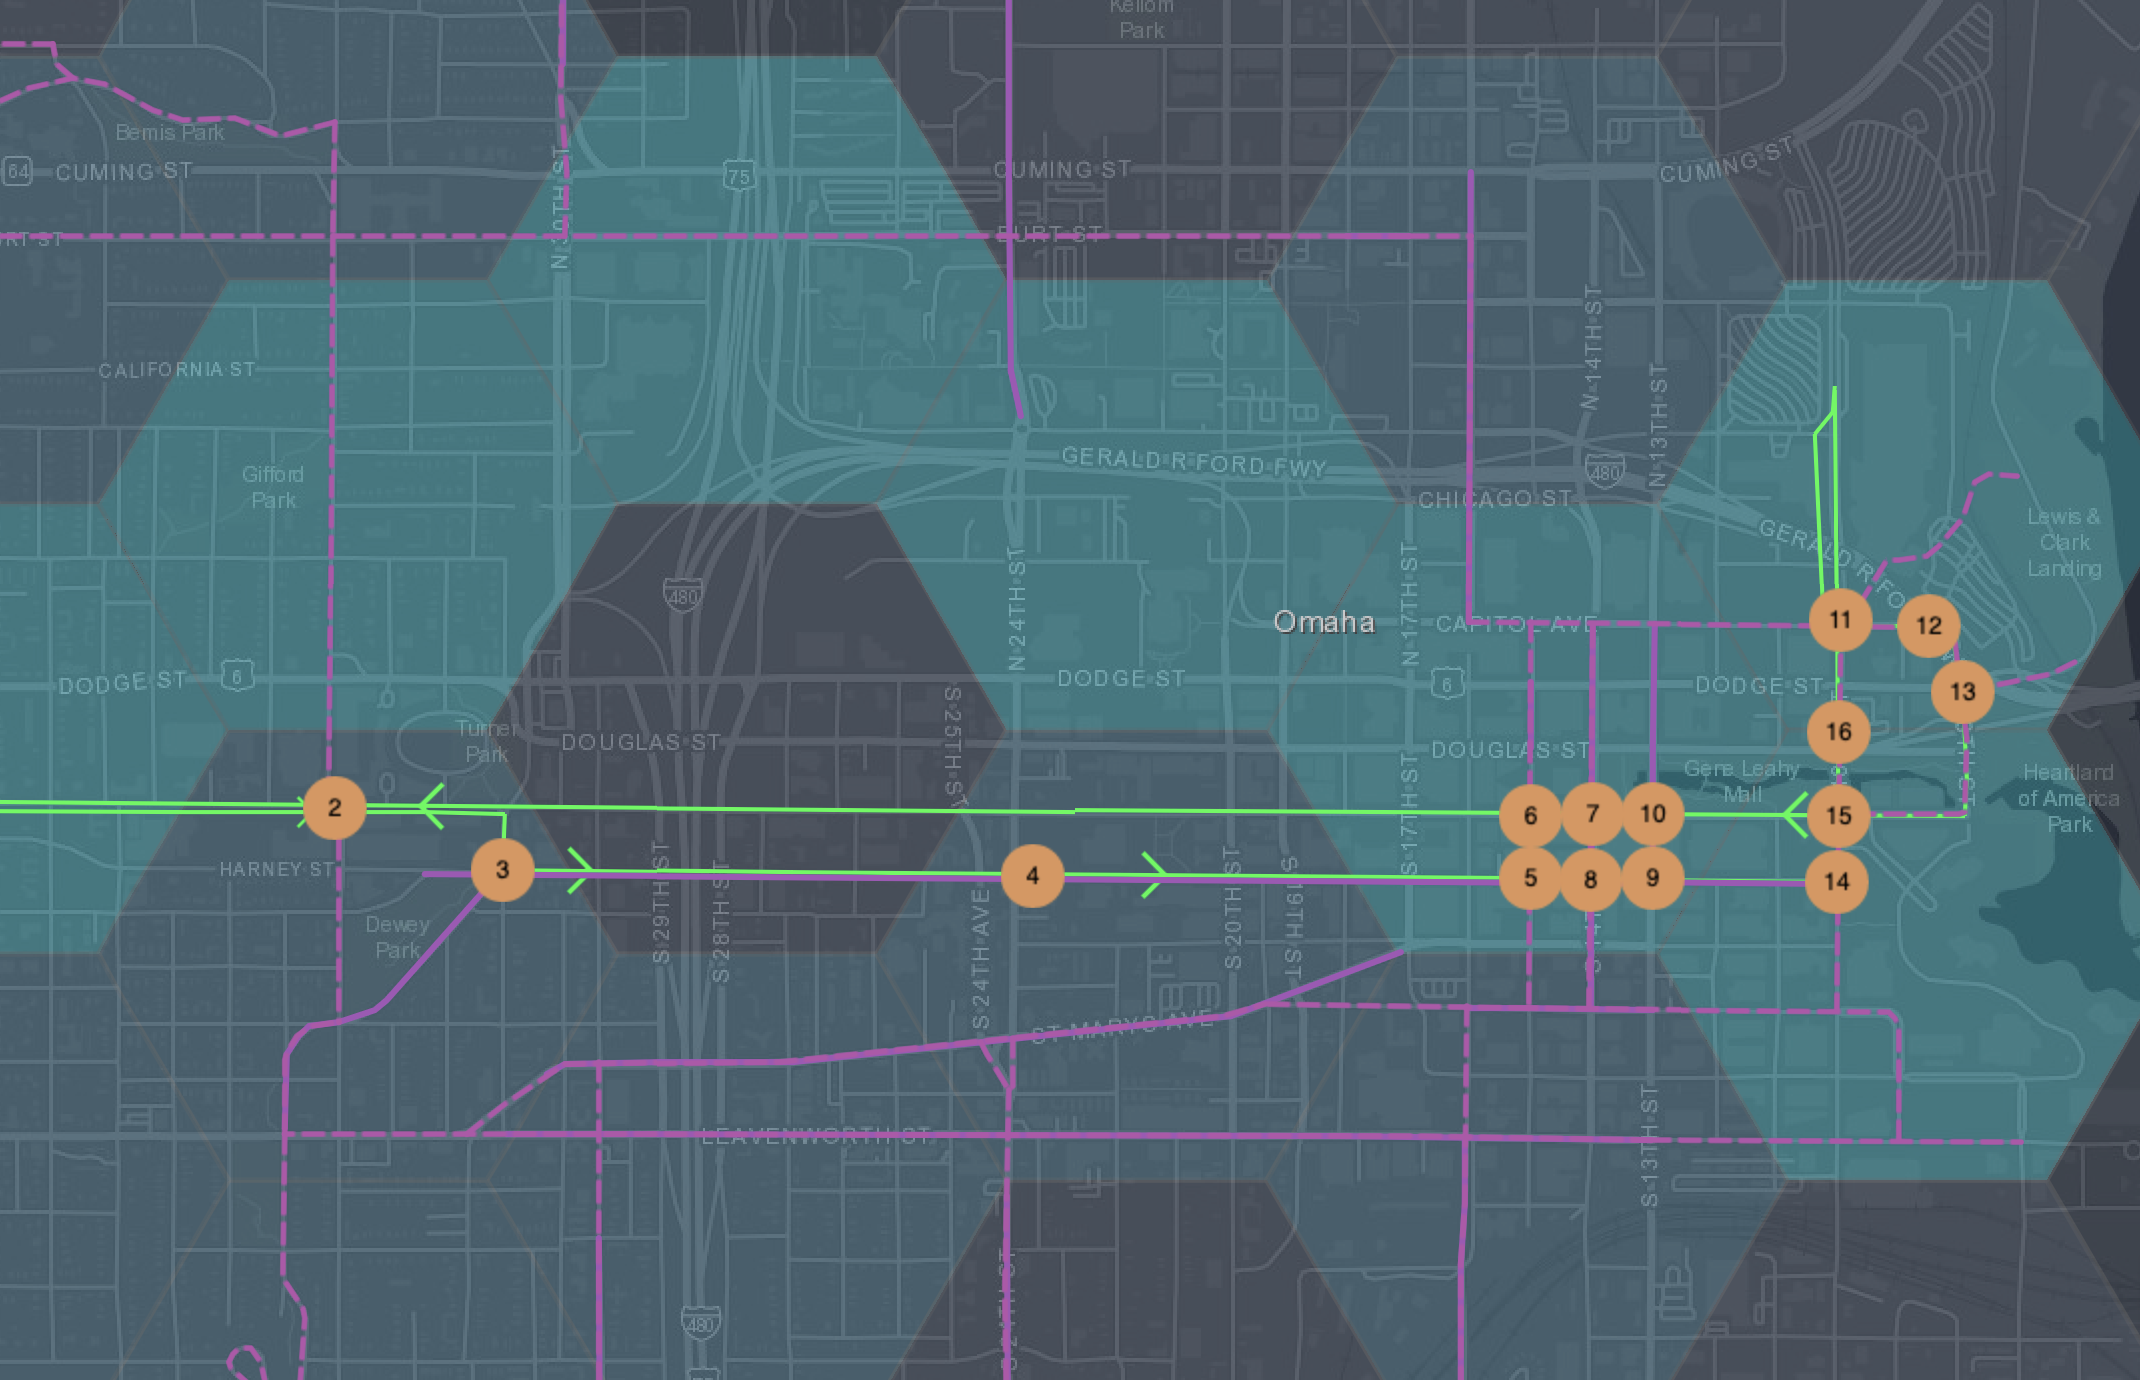 Report Shows Gaps in Bike Infrastructure and Potential Streetcar Conflicts.